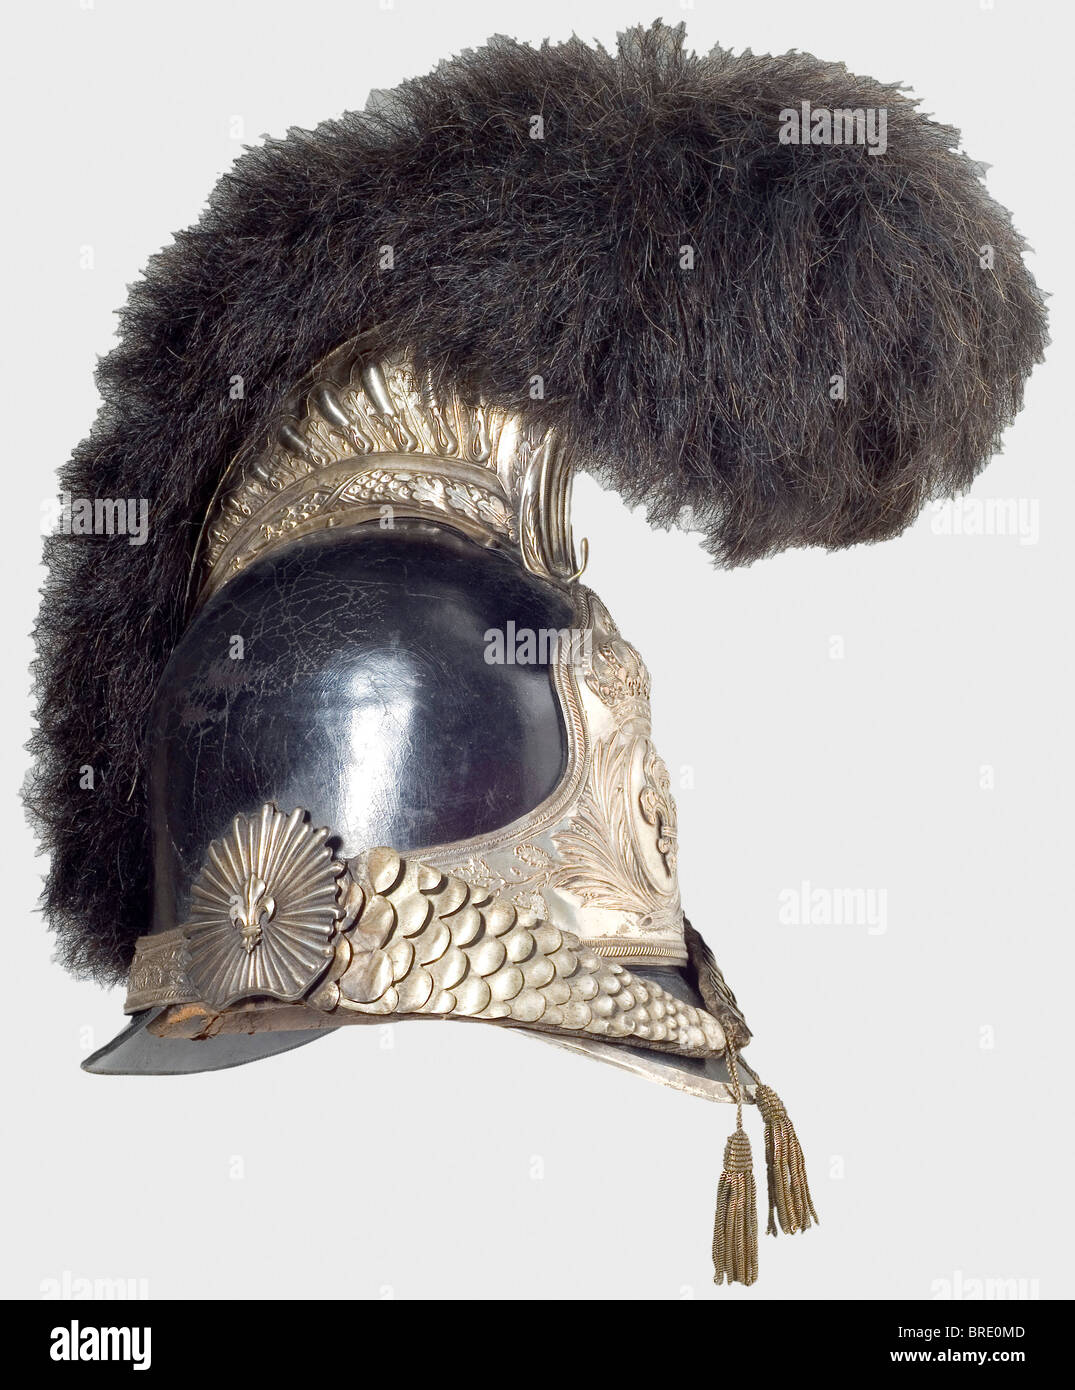 A helmet for the Garde Nationale, Restoration Period A tall two-piece leather skull with silver-plated mountings in fine relief and a horsehair crest. Large plate bearing the Bourbon fleur-de-lys under a crown. Metal chinscales backed with velvet on sunburst rosettes, each with a fleur-de-lys overlay. Leather sweatband and silk lining, marks of age and wear, silver plating rubbed. Height 39 cm. The matching protective case has a light-coloured leather-lined interior, the outside recently refinished with lacquer, and damaged latches. Also a bandolier (not origin, Stock Photo